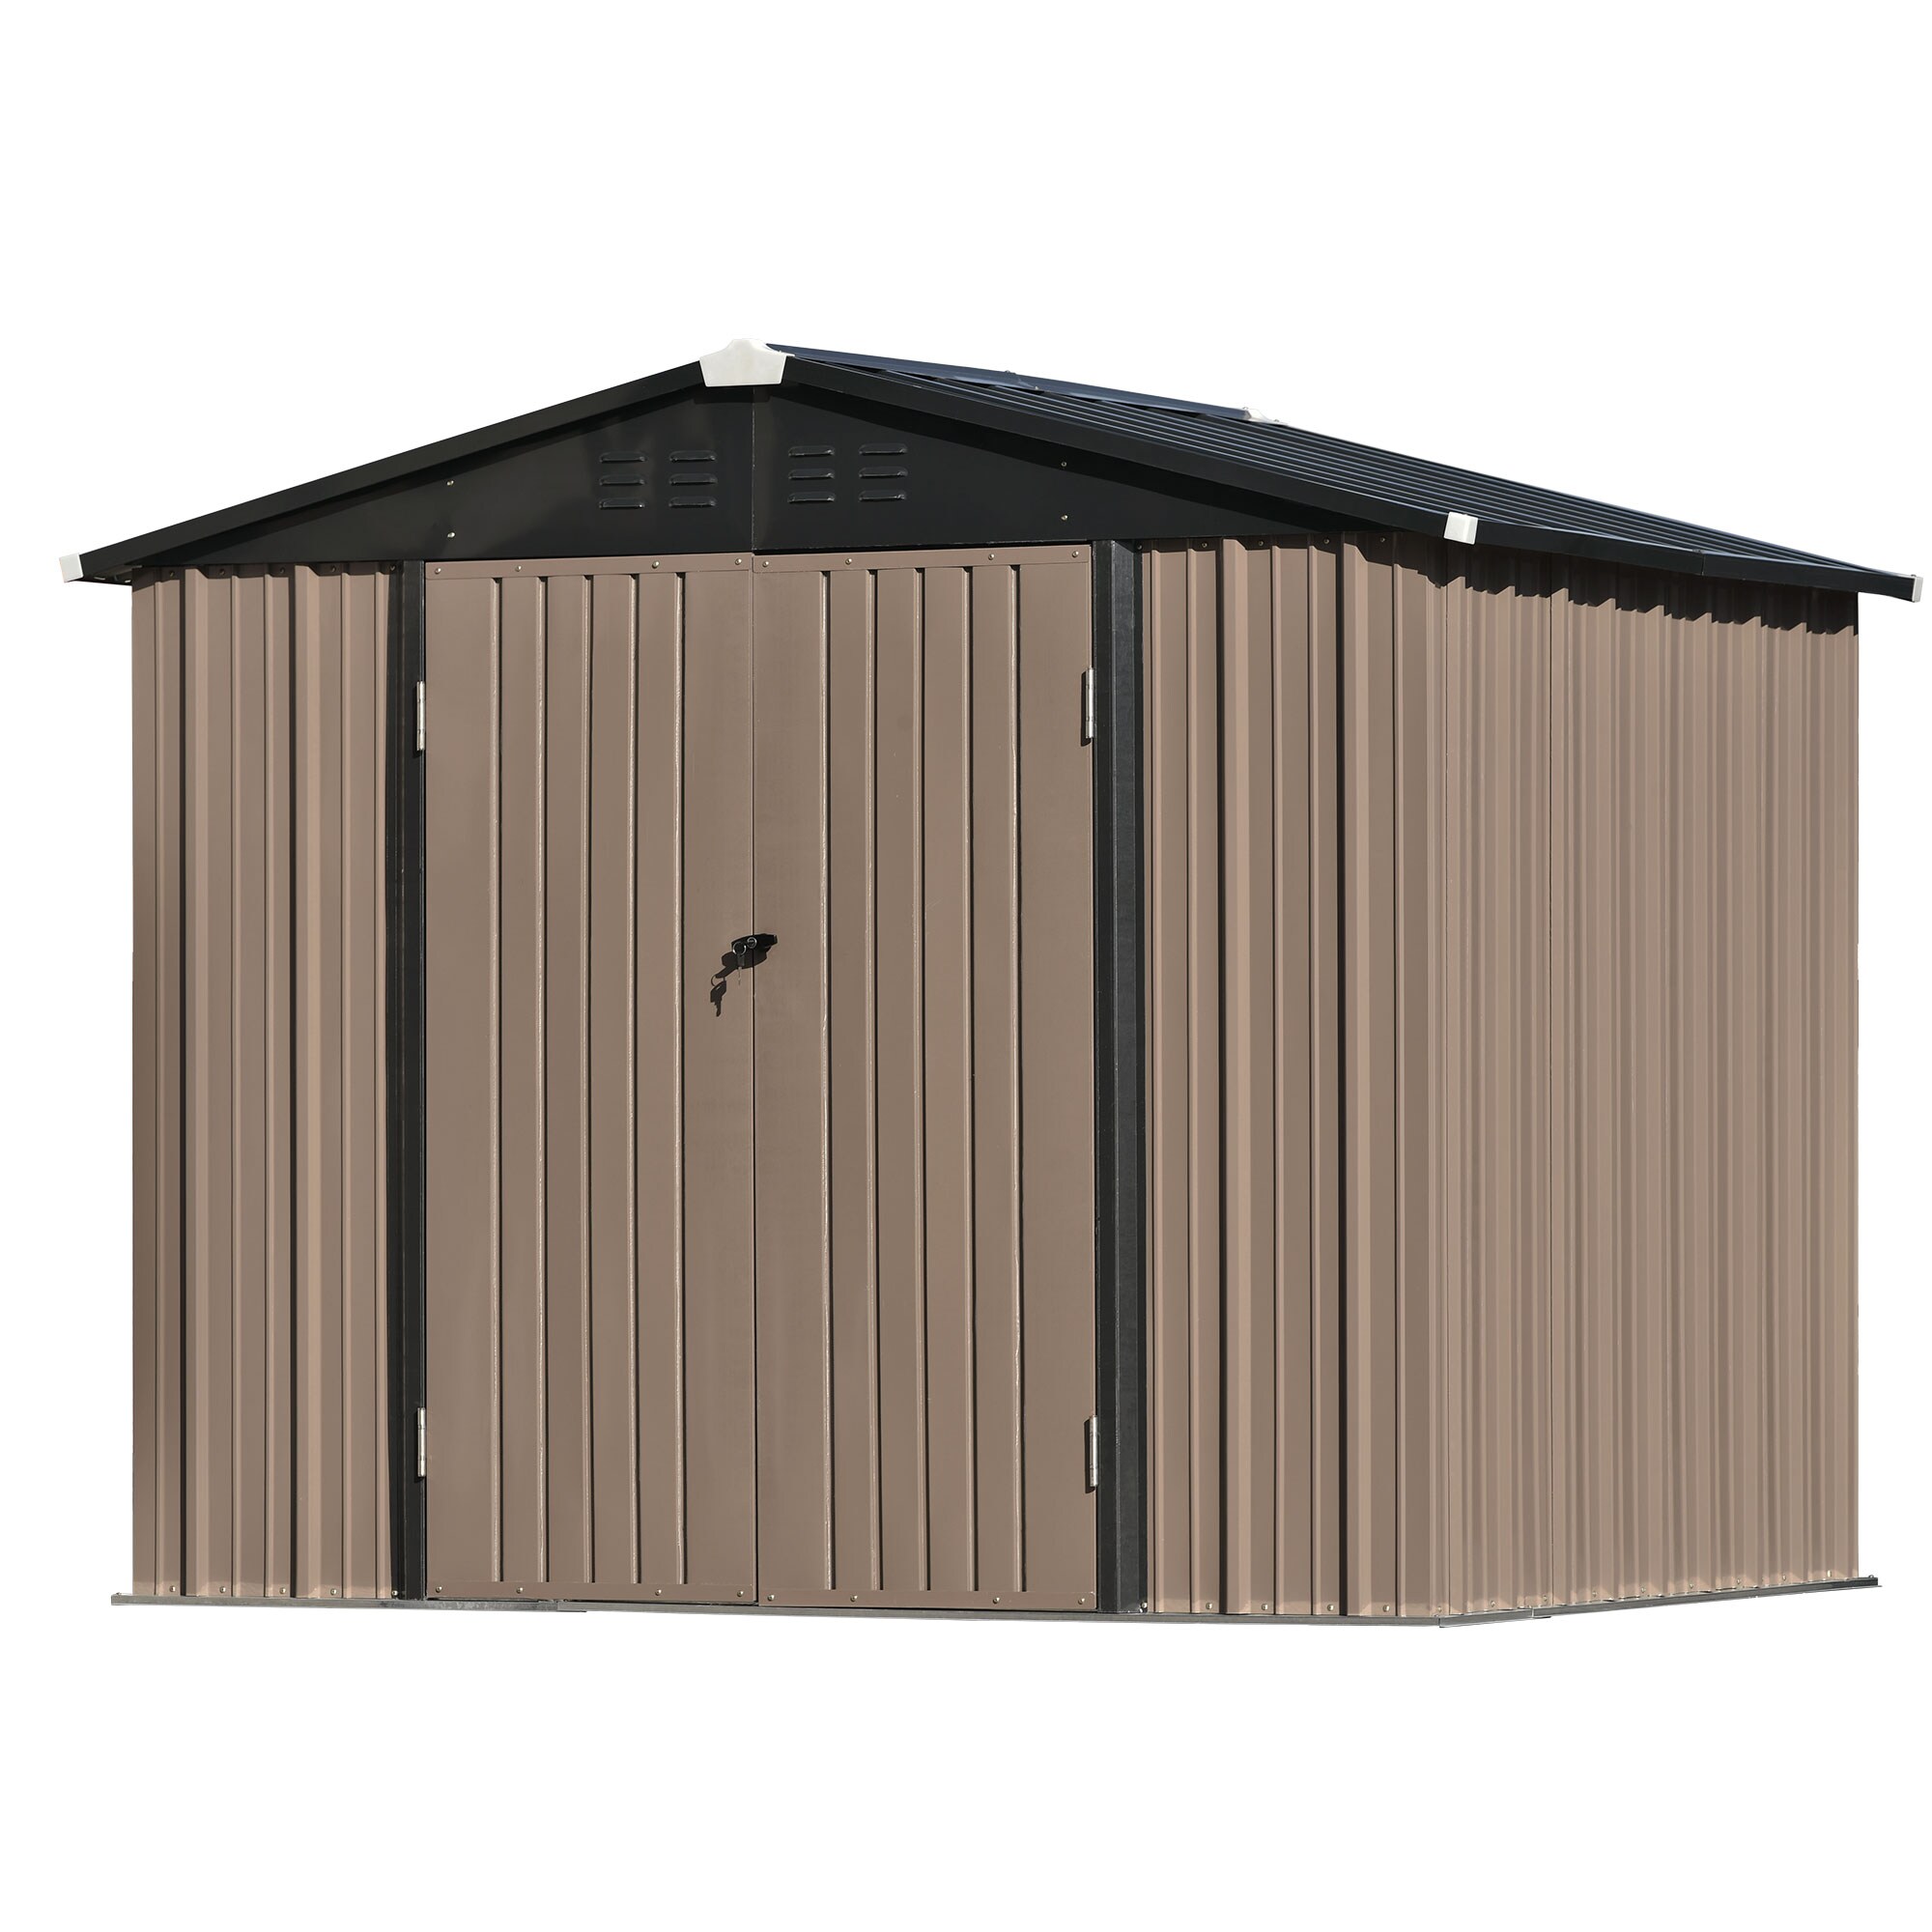 6-ft x 8-ft Metal Storage Shed Galvanized Steel Storage Shed in Brown | - WELLFOR TWSG013-BN